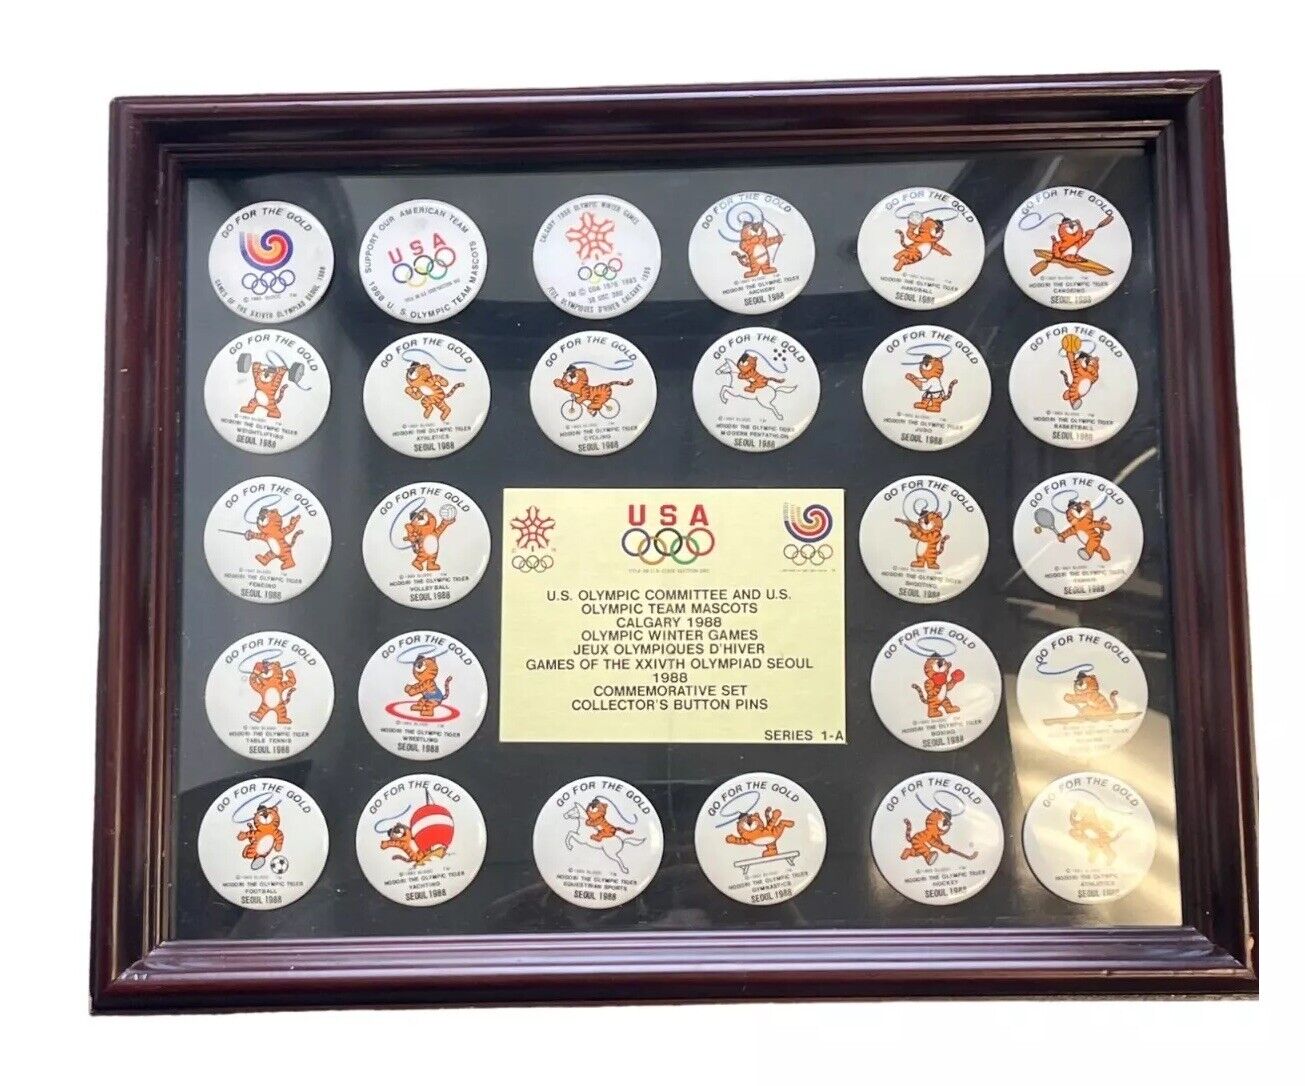 US Olympic Committee Team Mascots Calgary Seoul 1988 Collector Button Pin Set